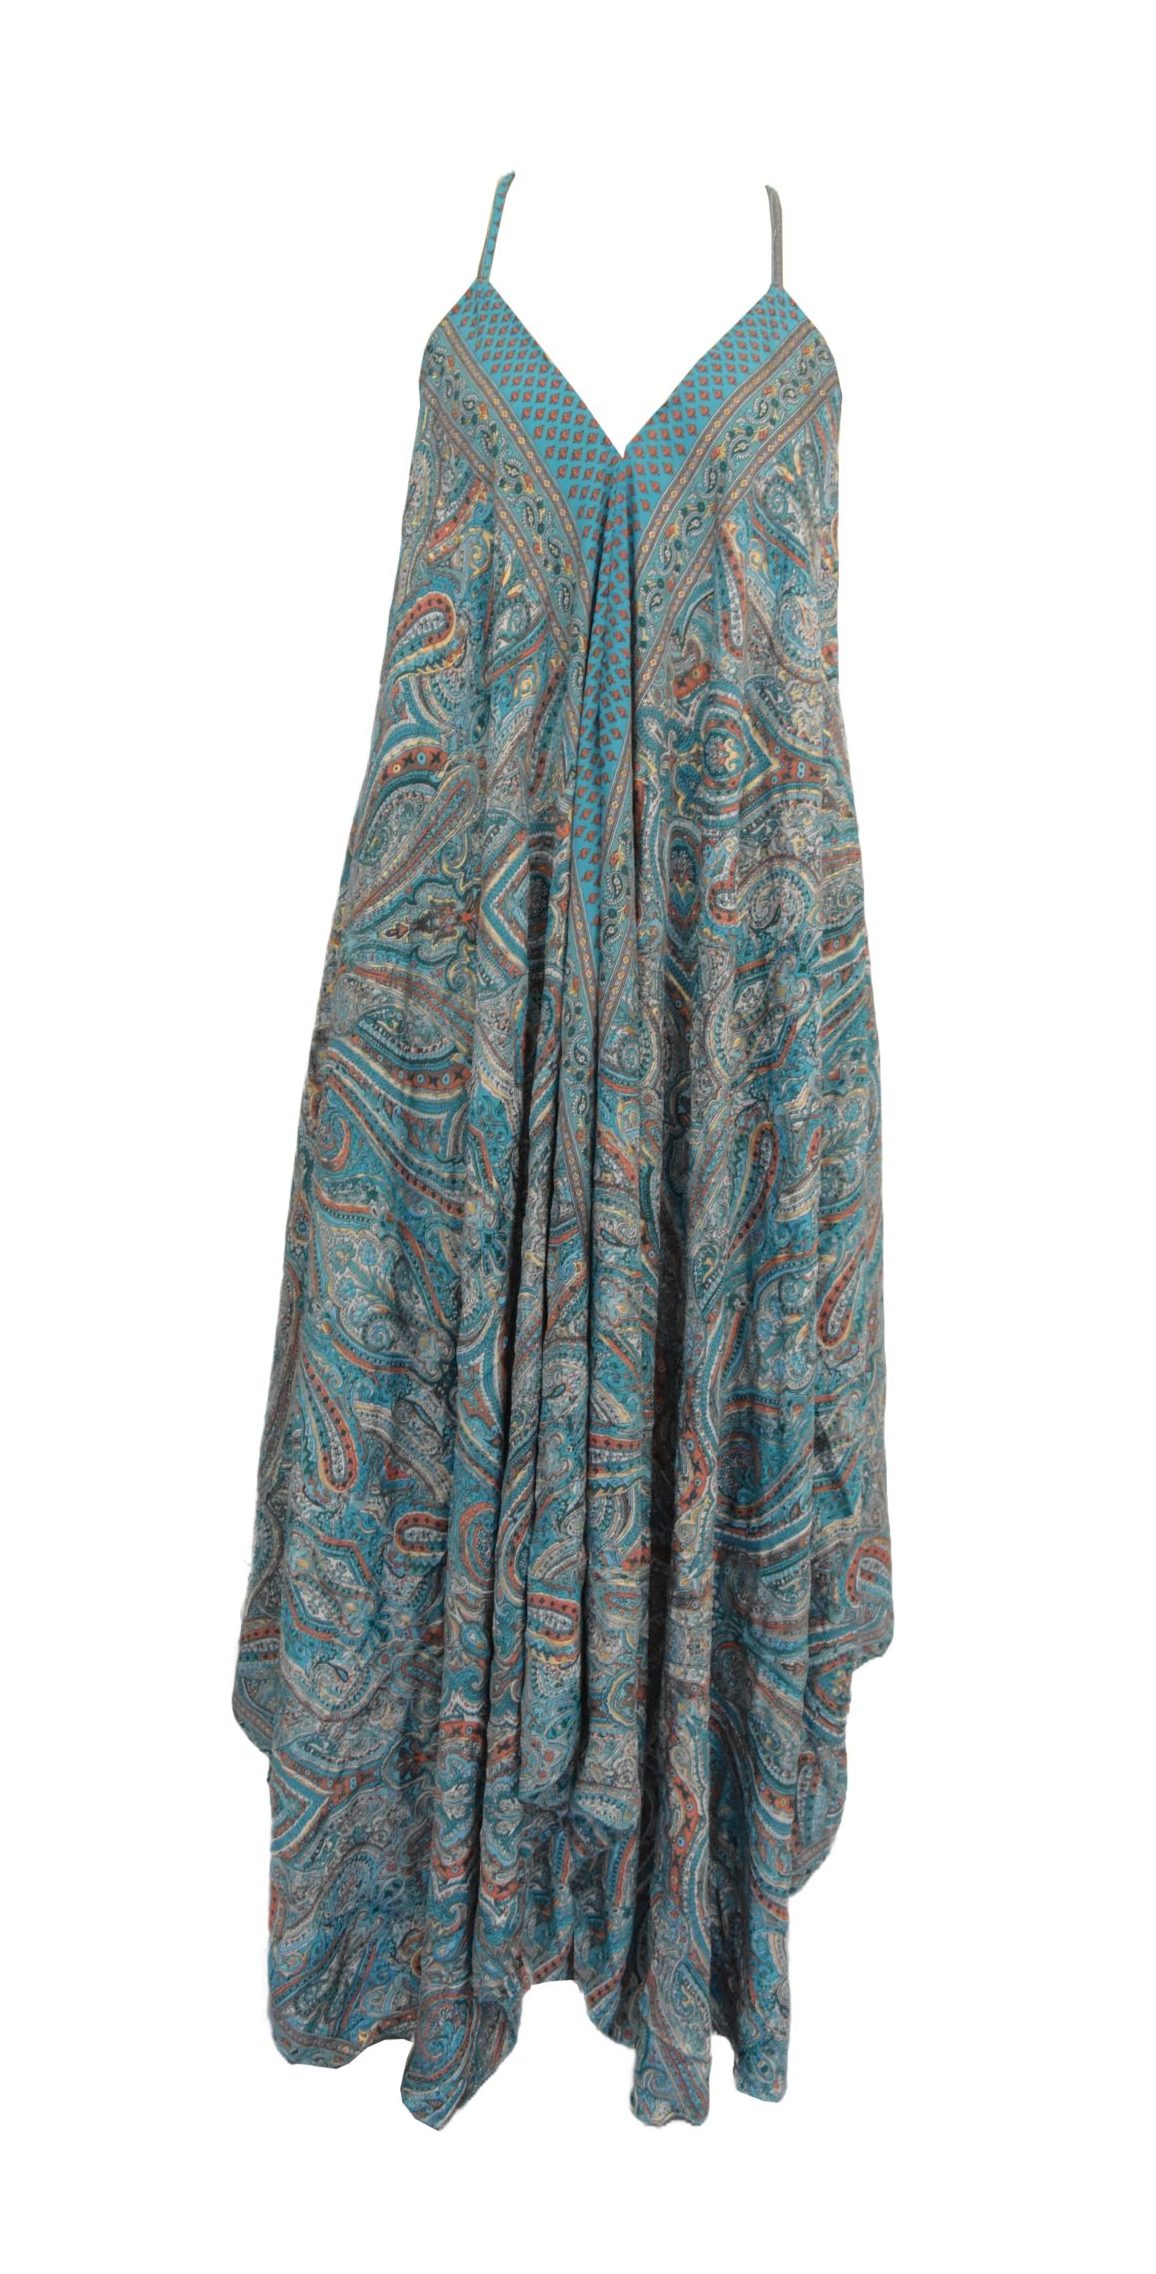 SKA Maxi Florida Viscose Dress in Teal-Orange-Gold - A vibrant dress with a playful tie detail at the back, perfect for sunny days and warm evenings